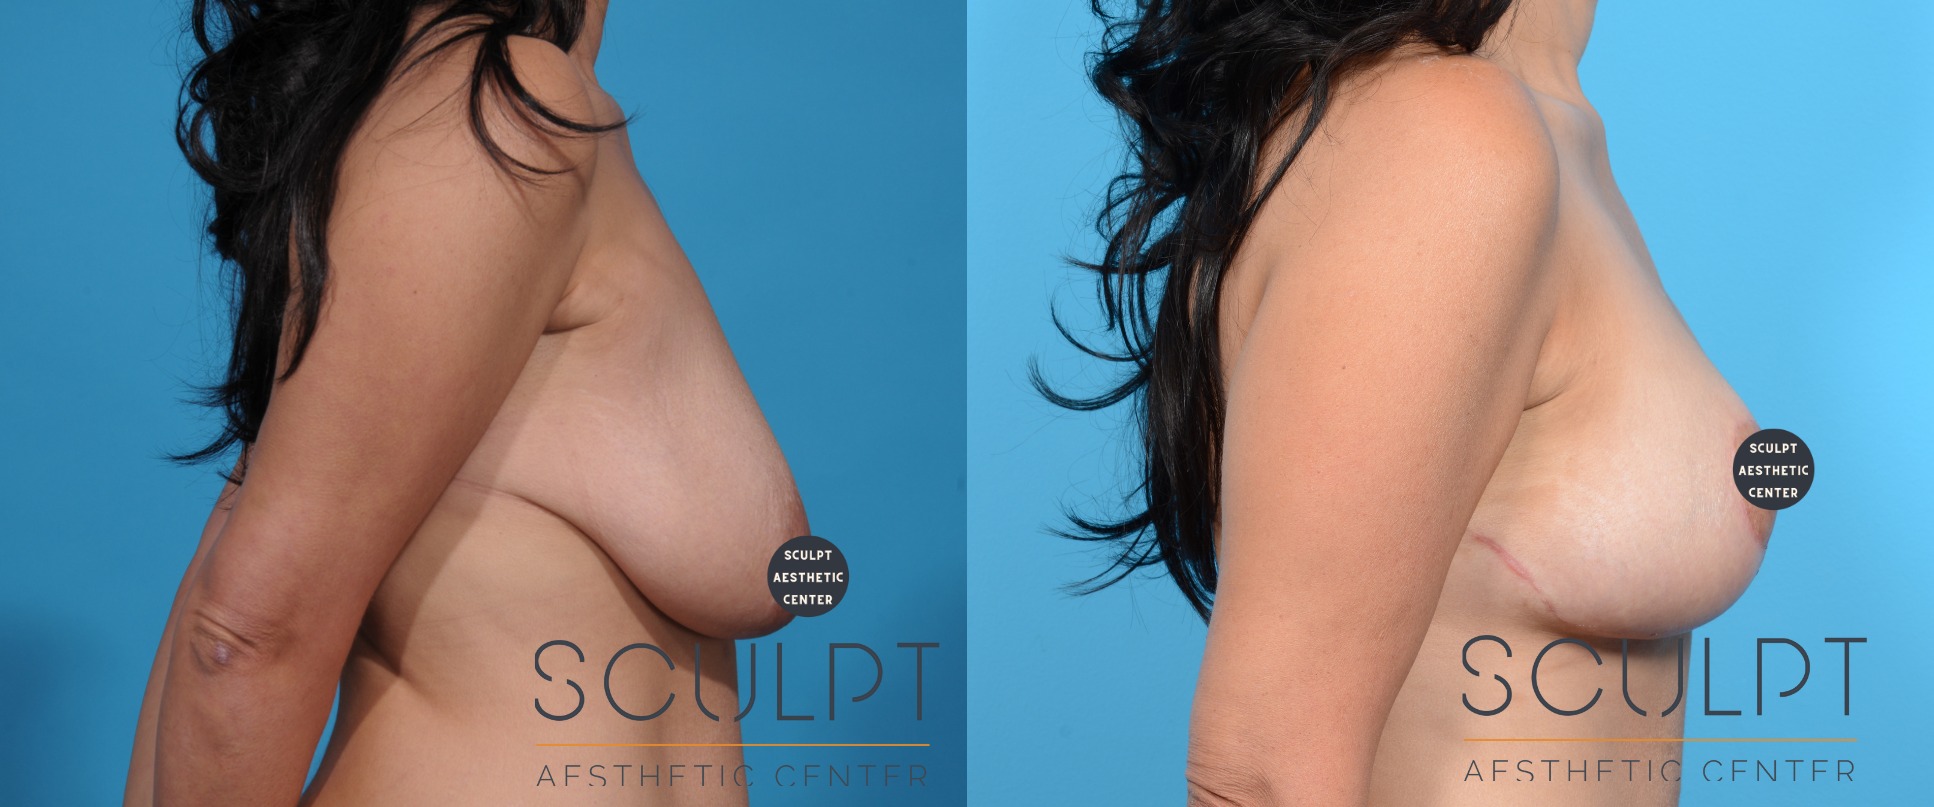 Breast Lift Before and After Photo by Sculpt Aesthetic Center in Frisco, TX